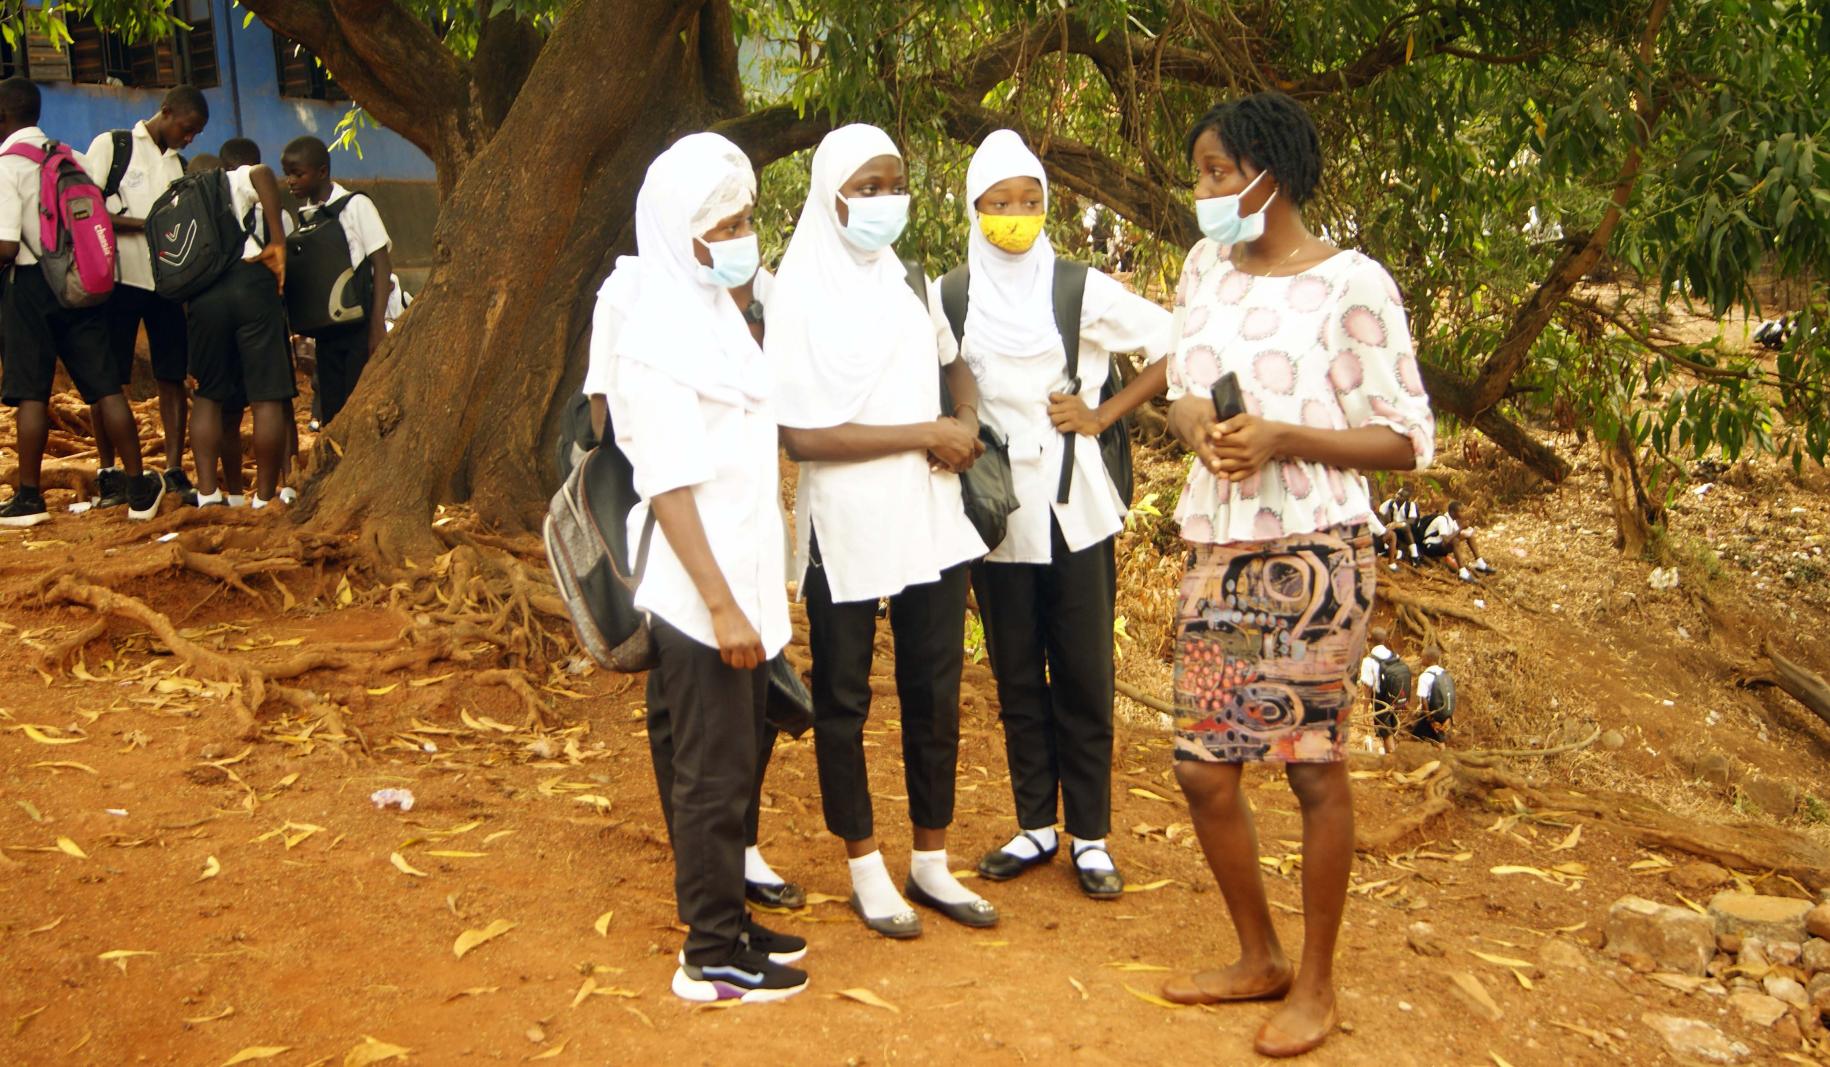 A woman wearing a face mask stands and speaks with three adolescent girls.